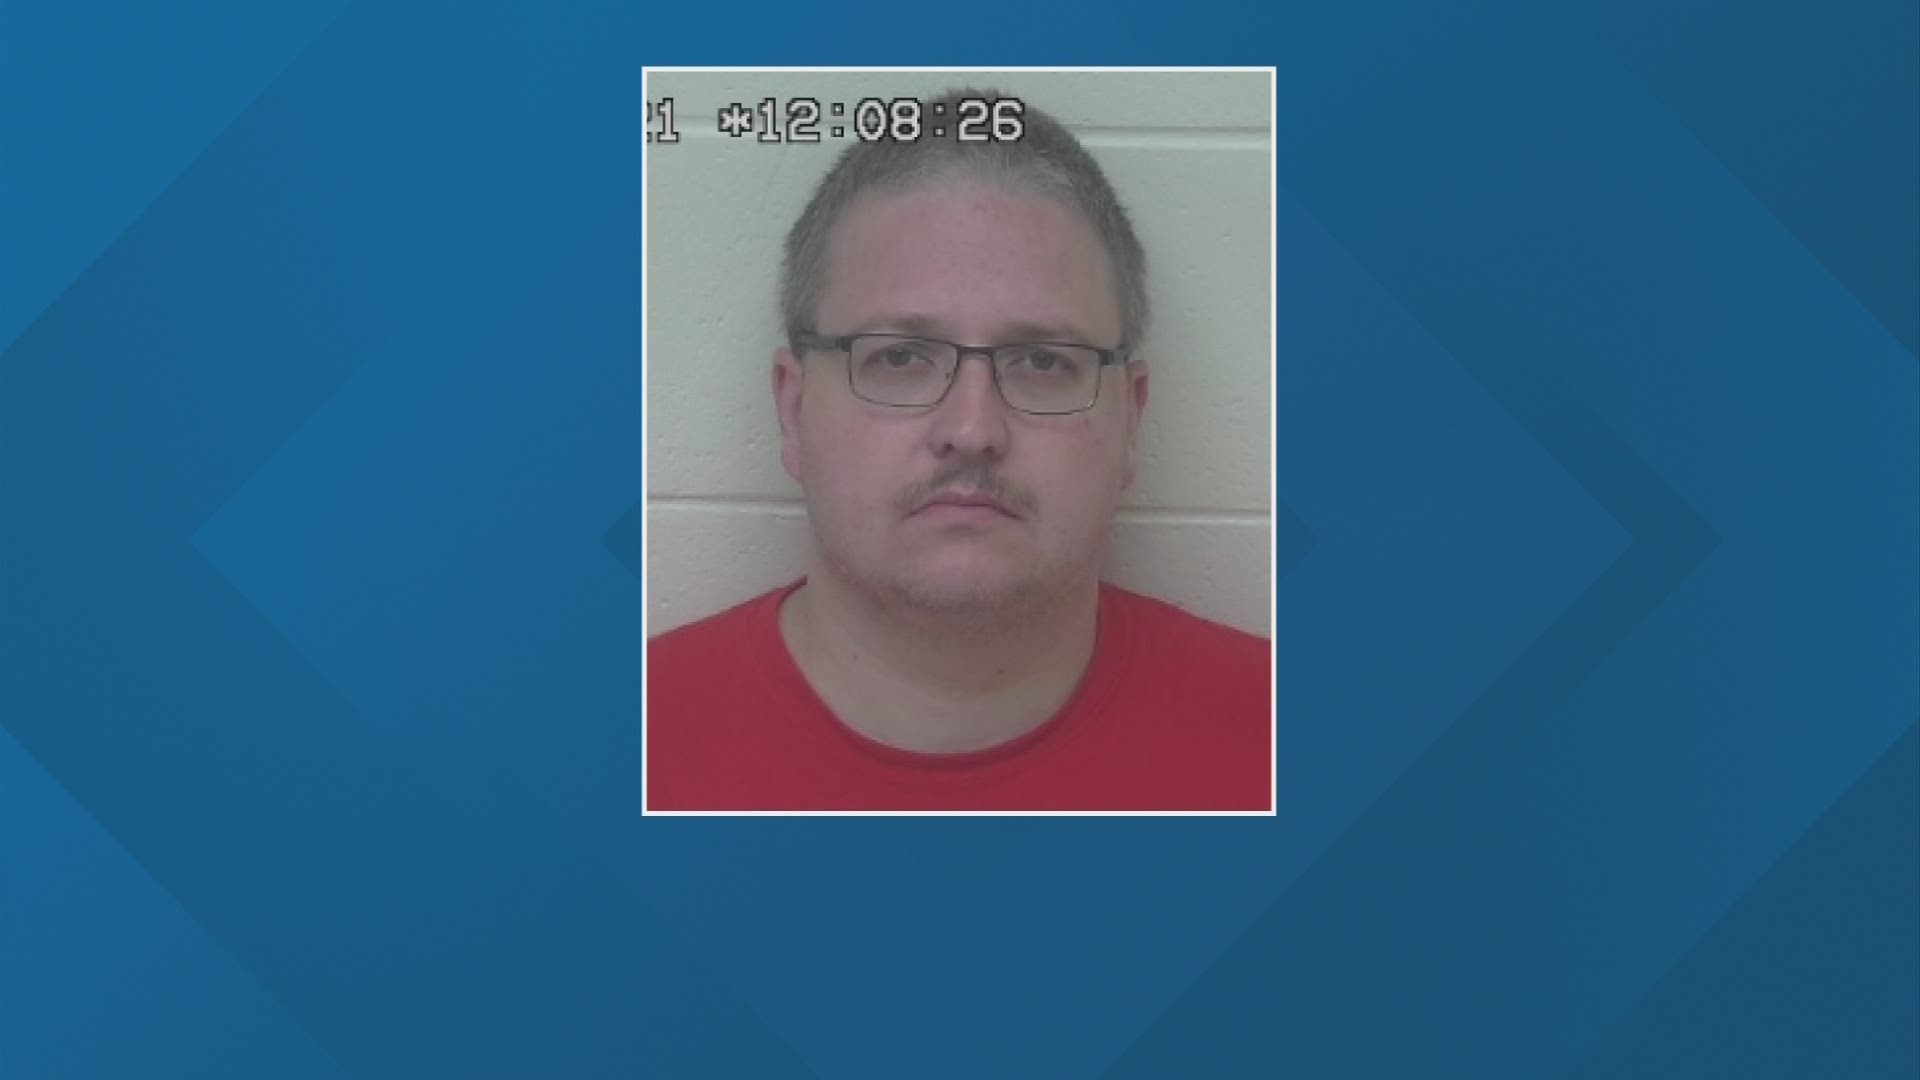 The Scioto County Sheriff's Office says an employee has been arrested for conspiring with inmates to bring drugs into the detention facility.